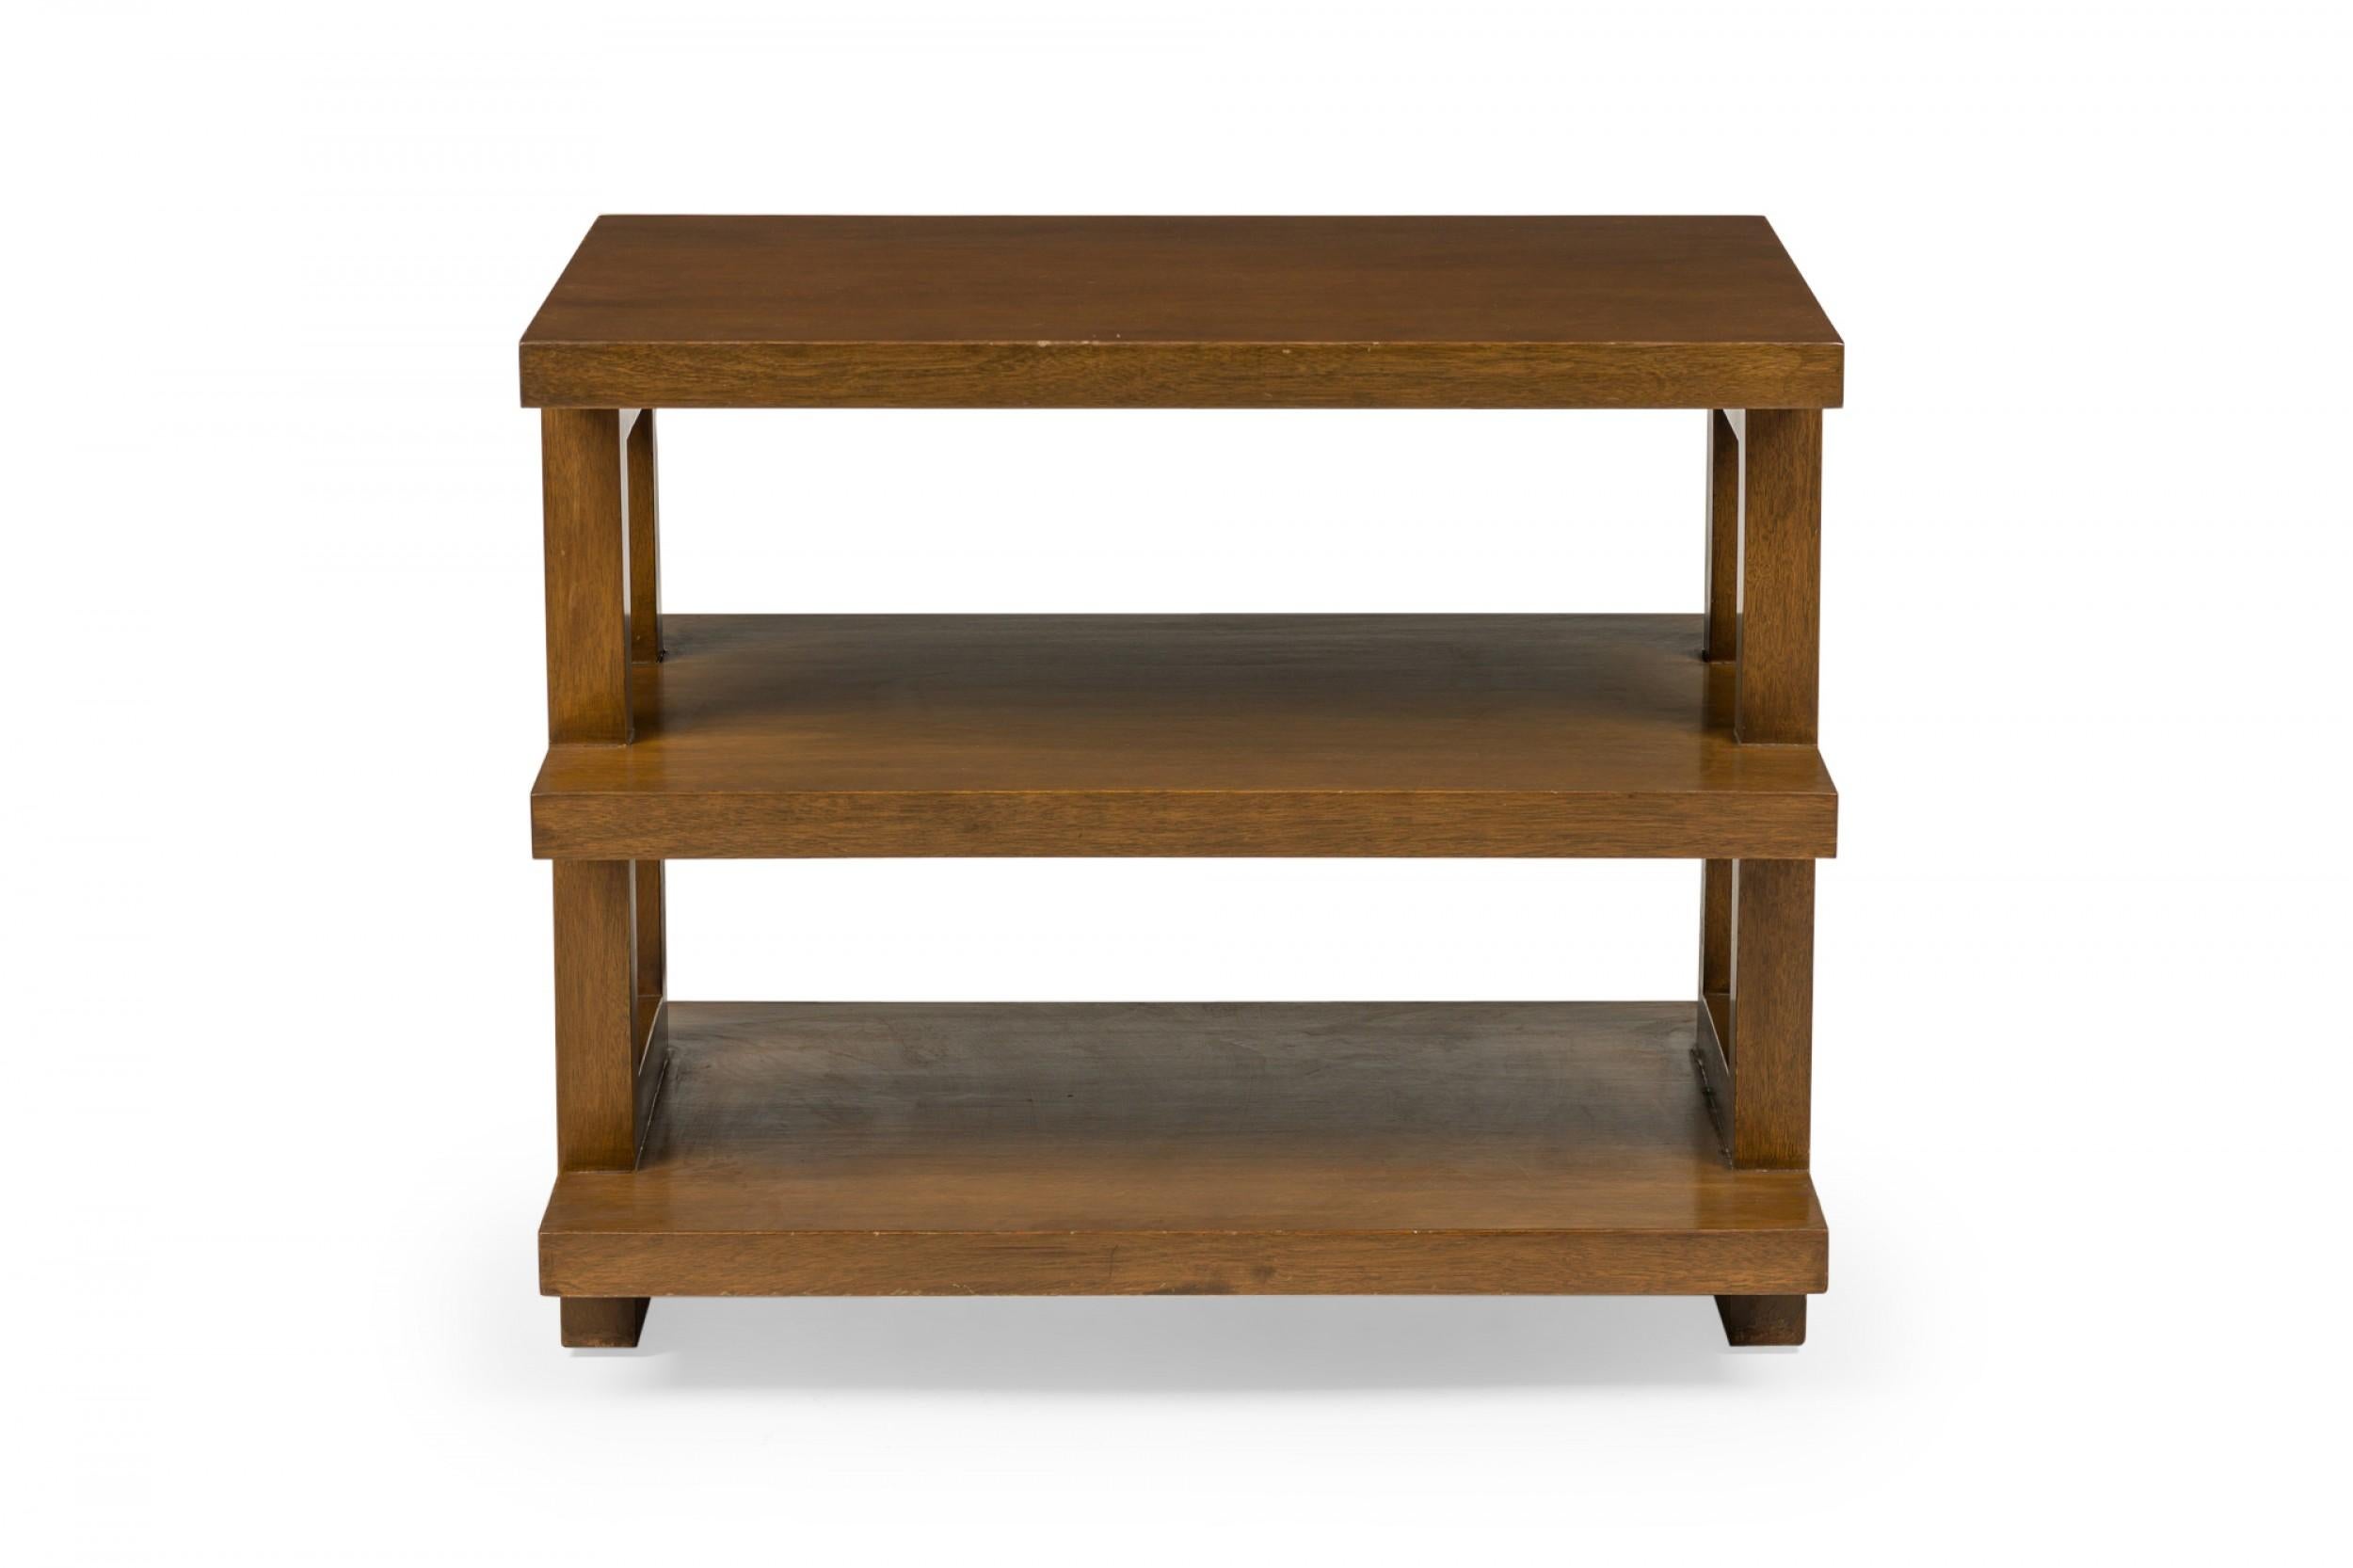 American mid-century three-tier medium brown finished wooden end table with a rectangular top and two shelves below, with rectangular supports on either side, resting on a pedestal base. (Edward Wormley for Dunbar Furniture Company)(Similar tables: